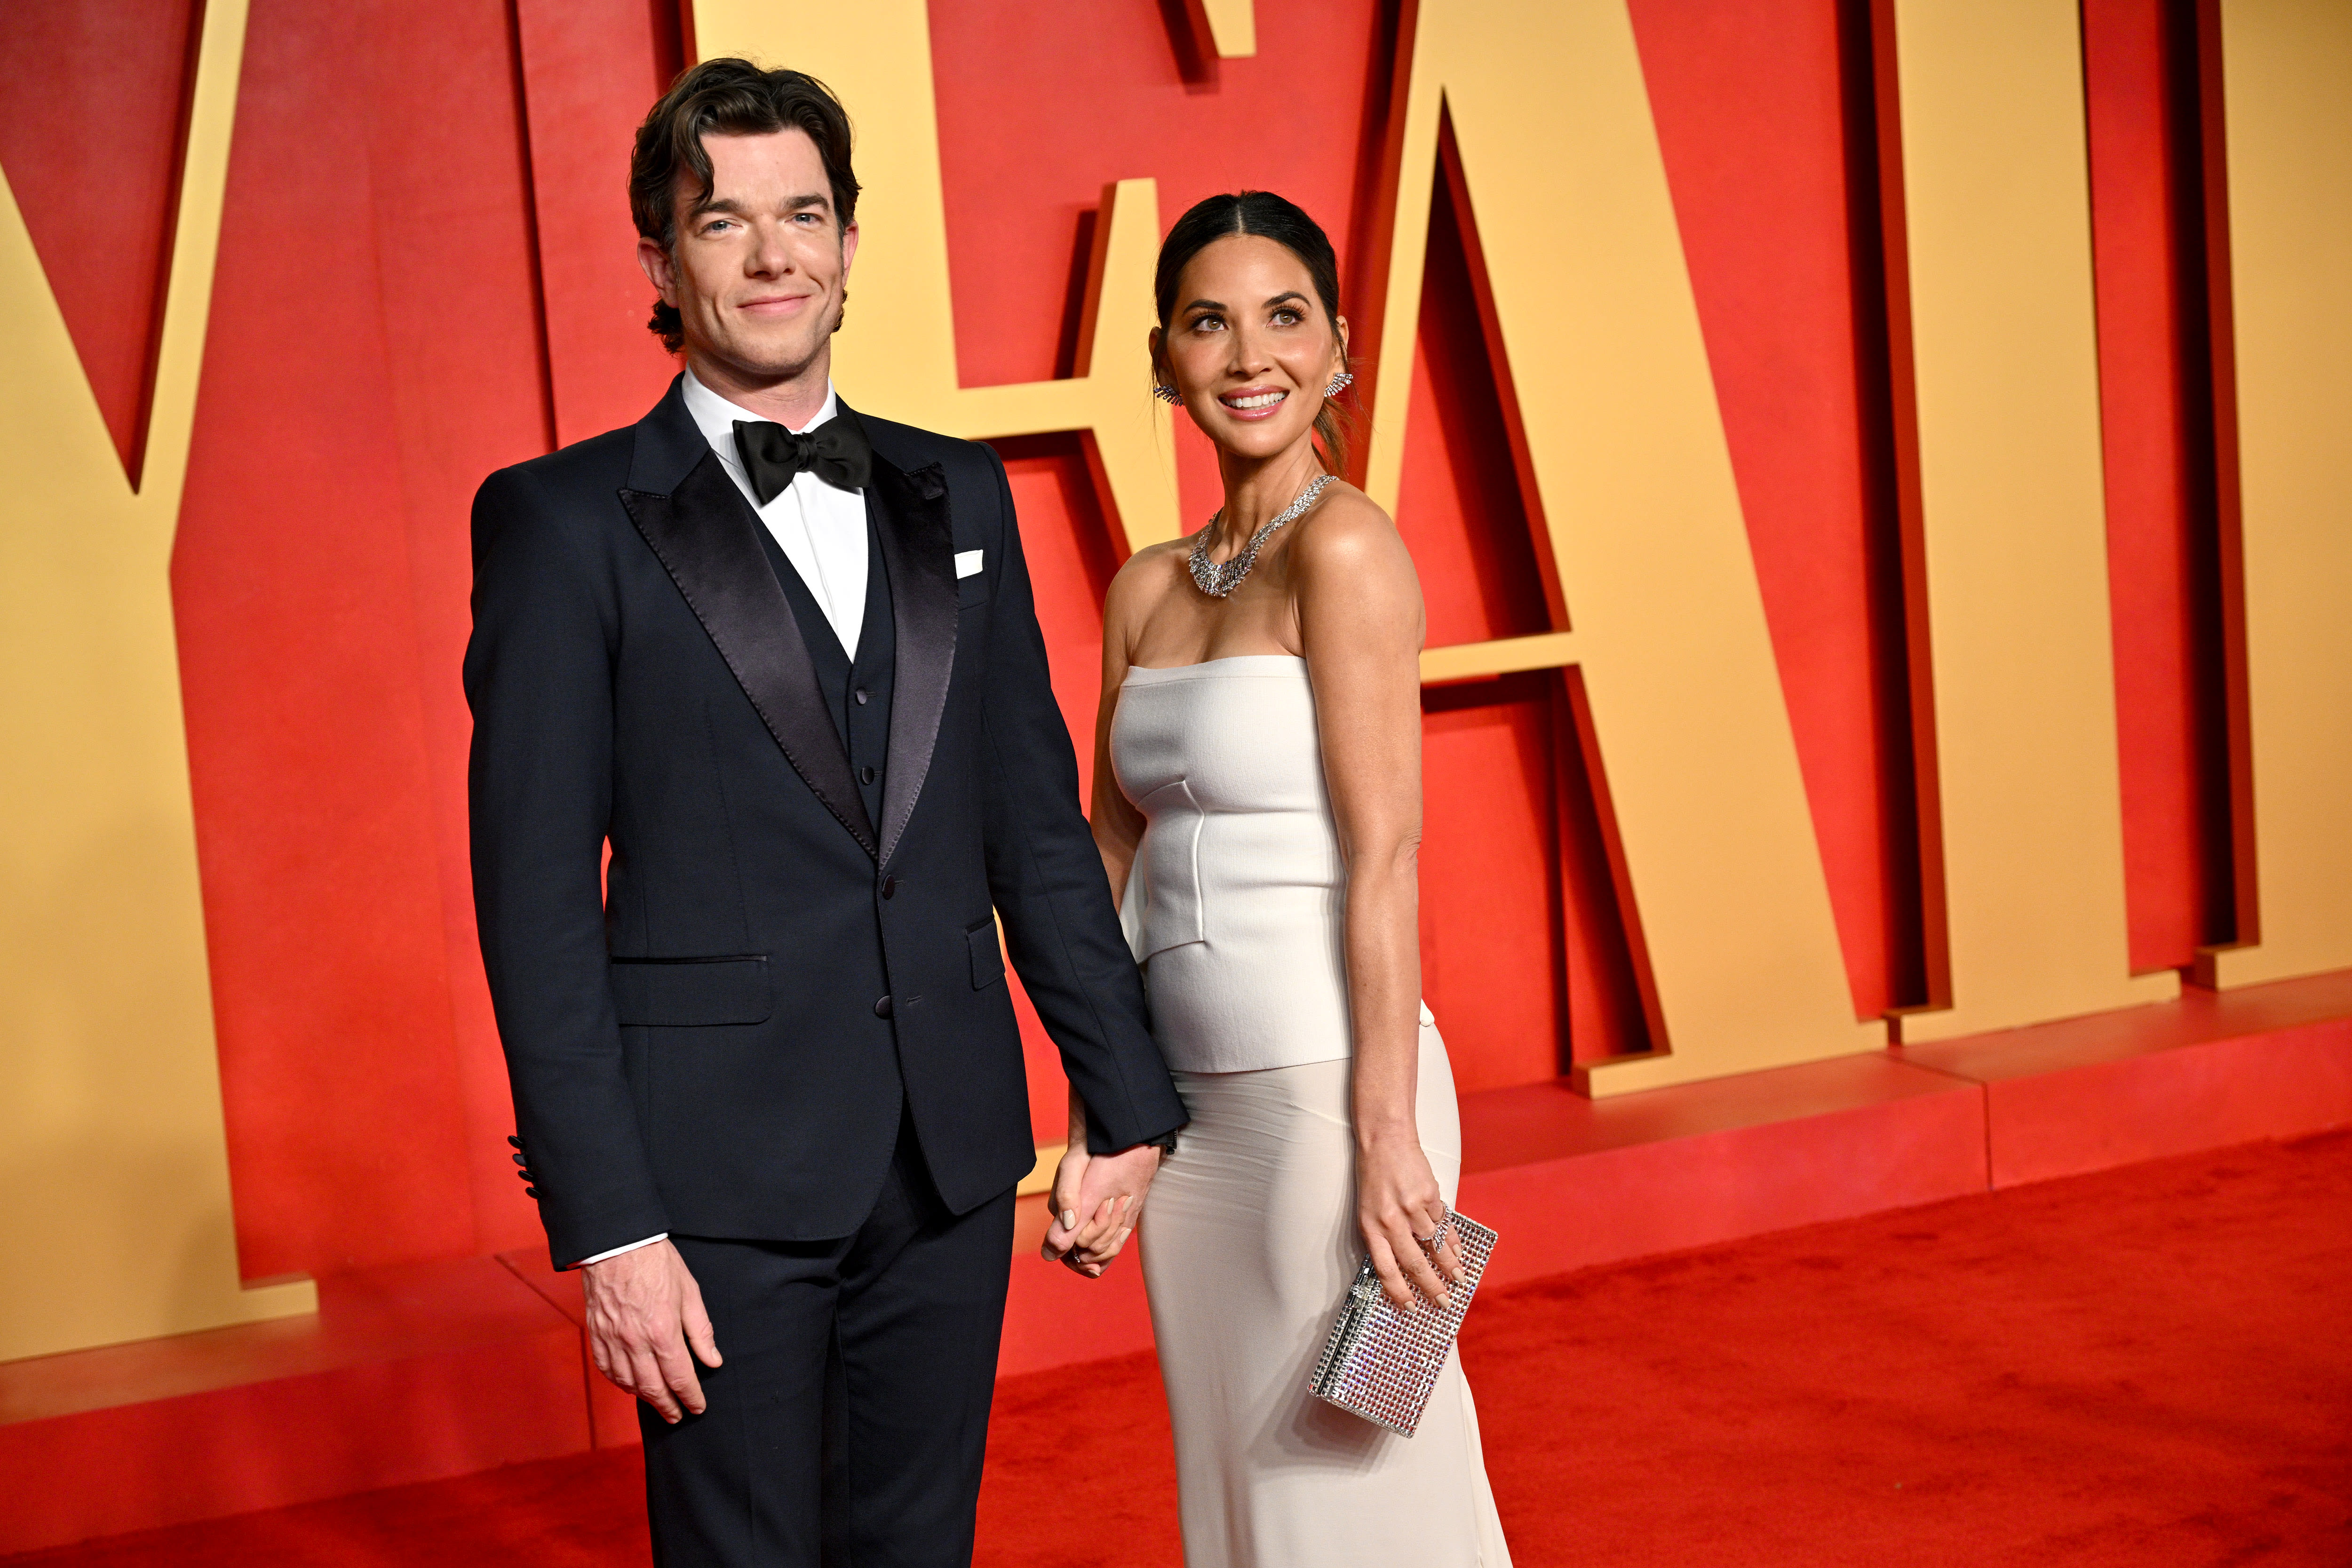 John Mulaney and Olivia Munn are married: From undercover couple to newlyweds